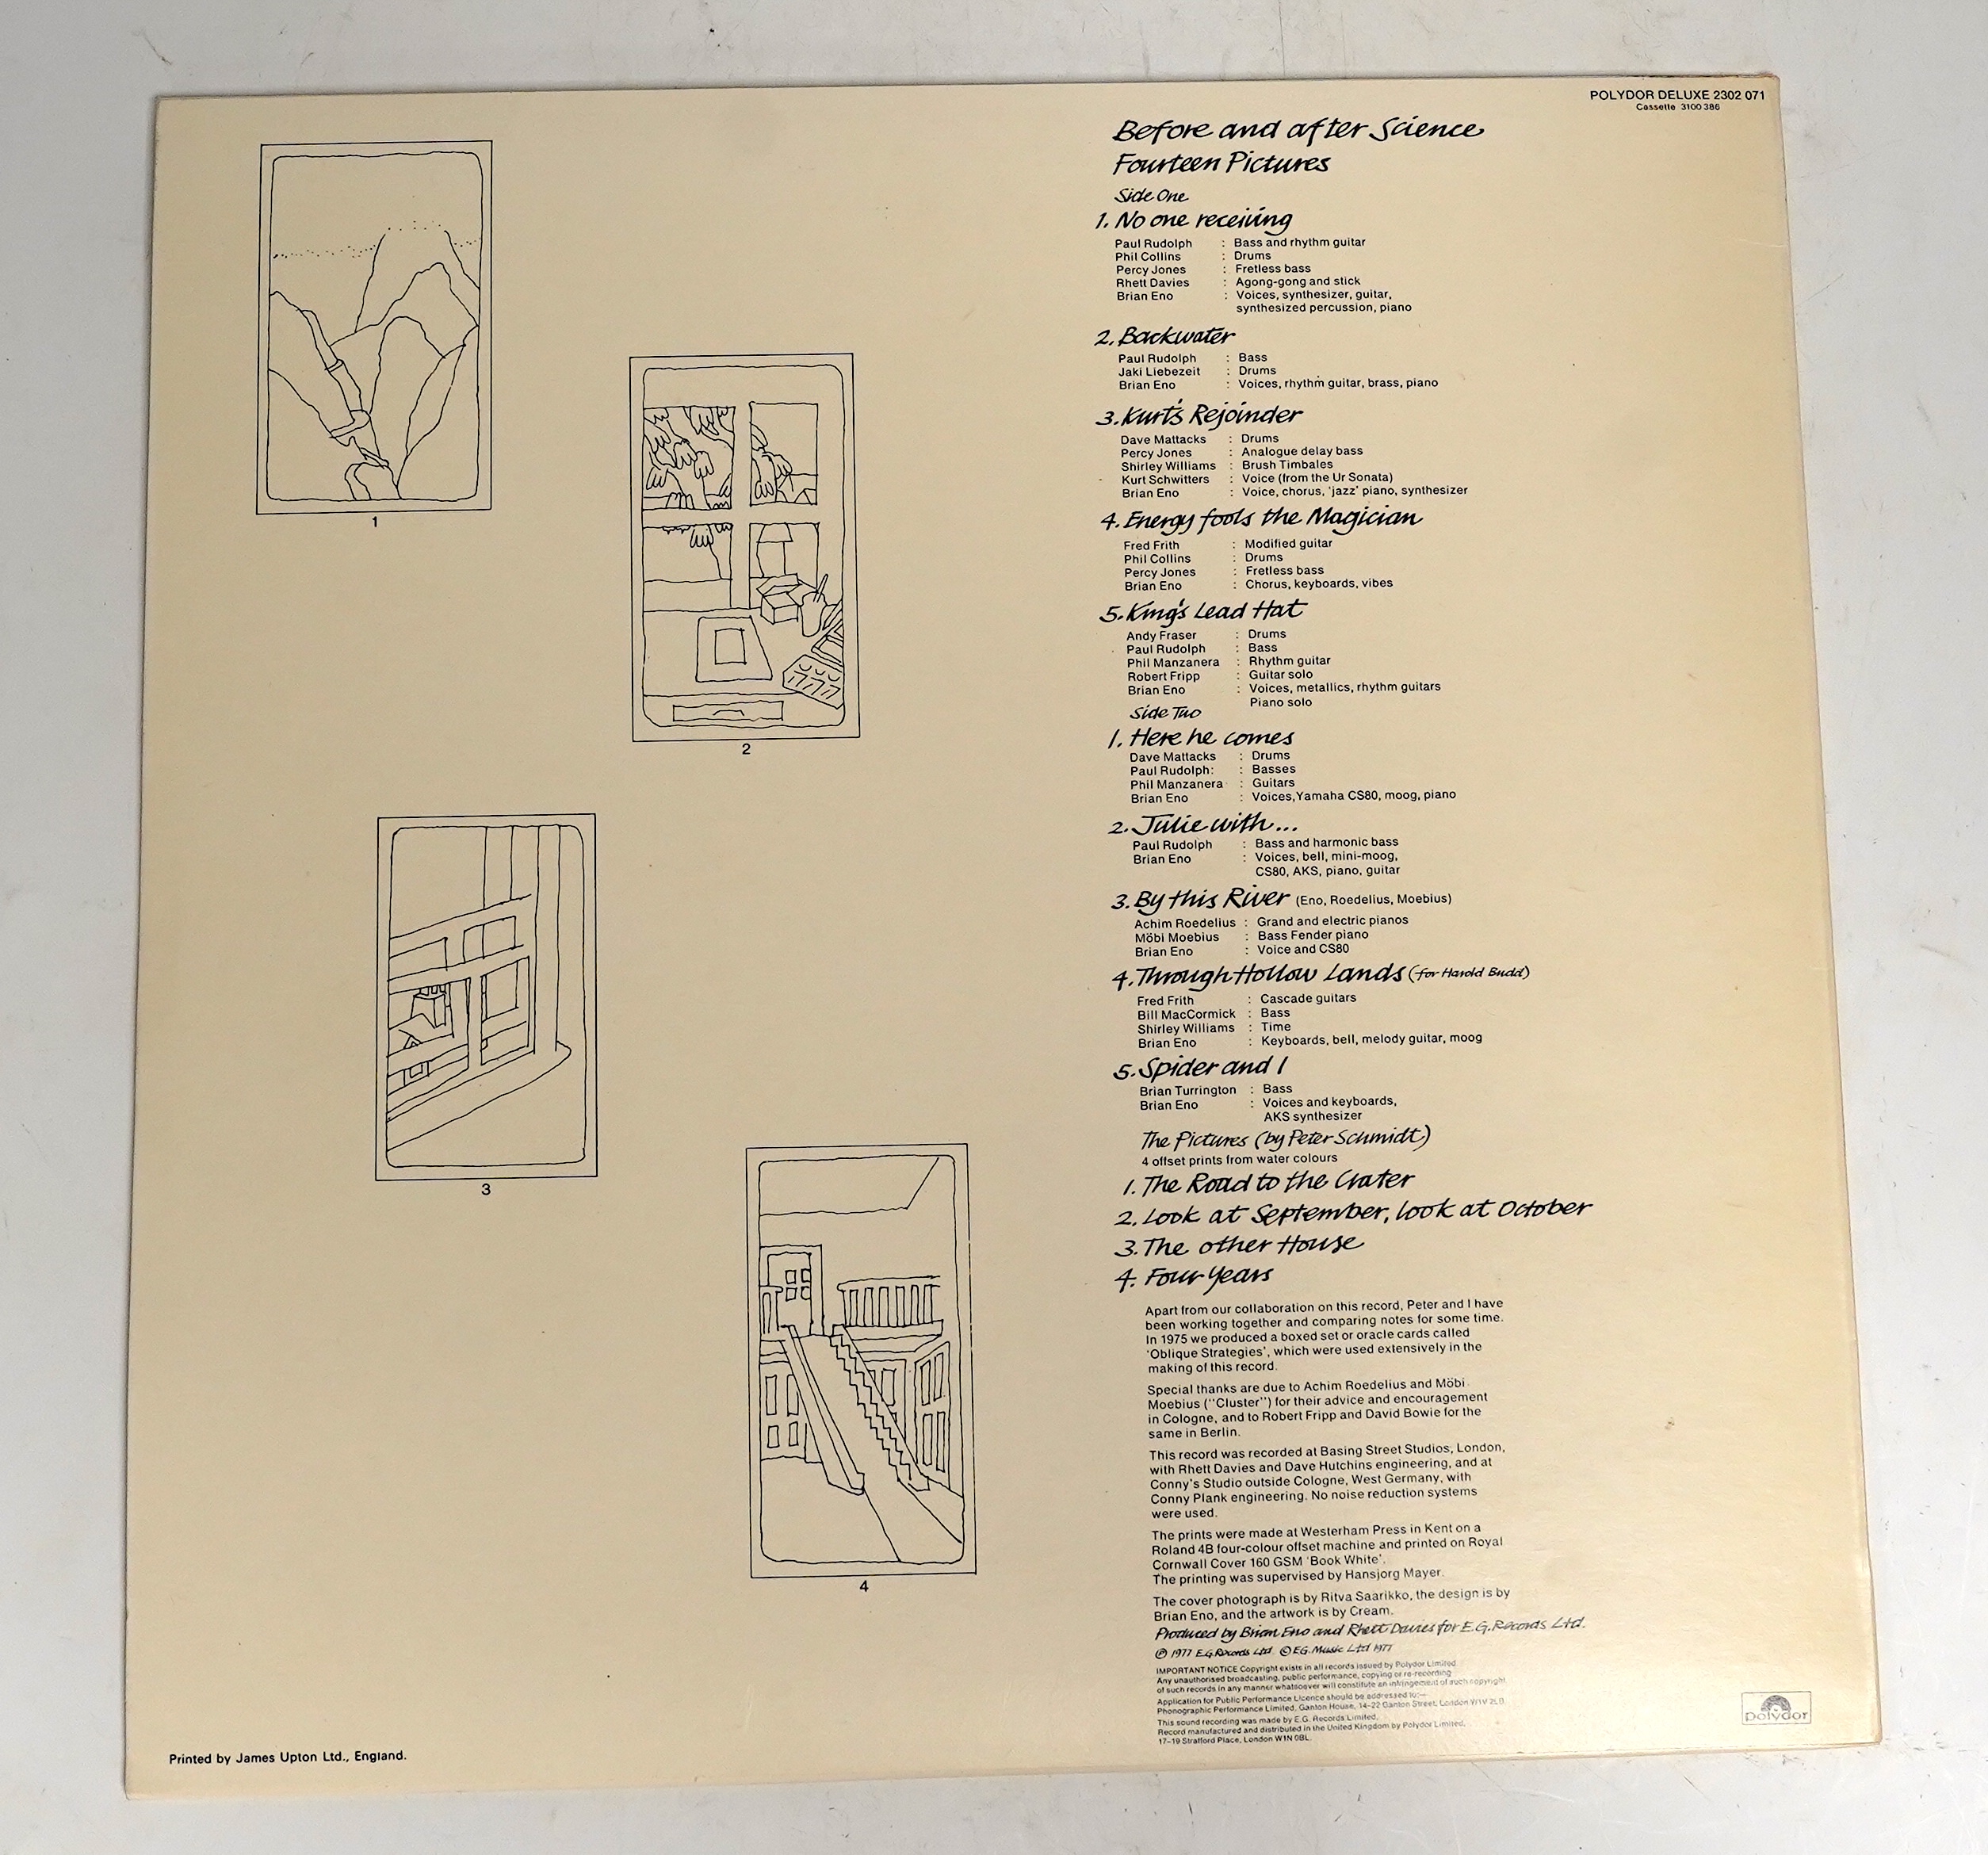 Brian Eno; Before and After Science LP record album on Polydor label 2302 071, with the four Peter Schmidt prints in envelope